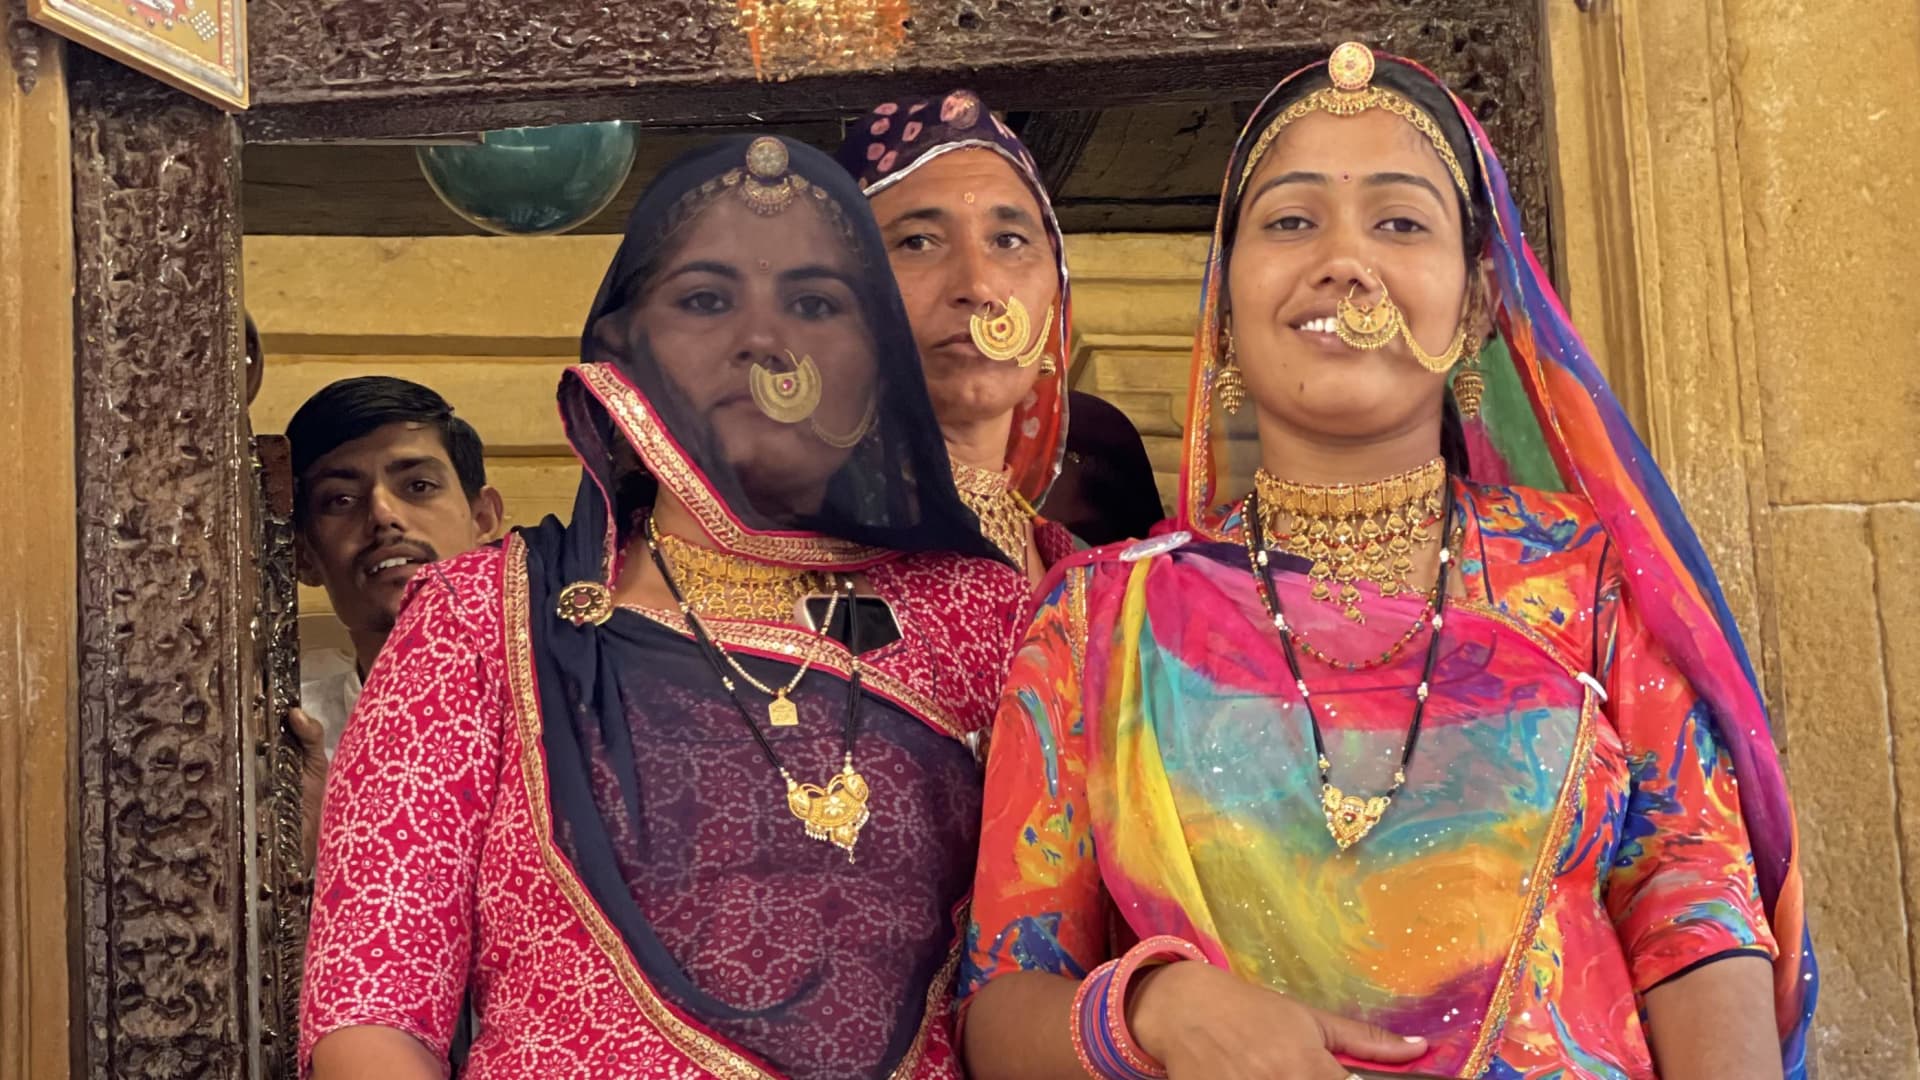 The faces of those living in Jaisalmer Fort.